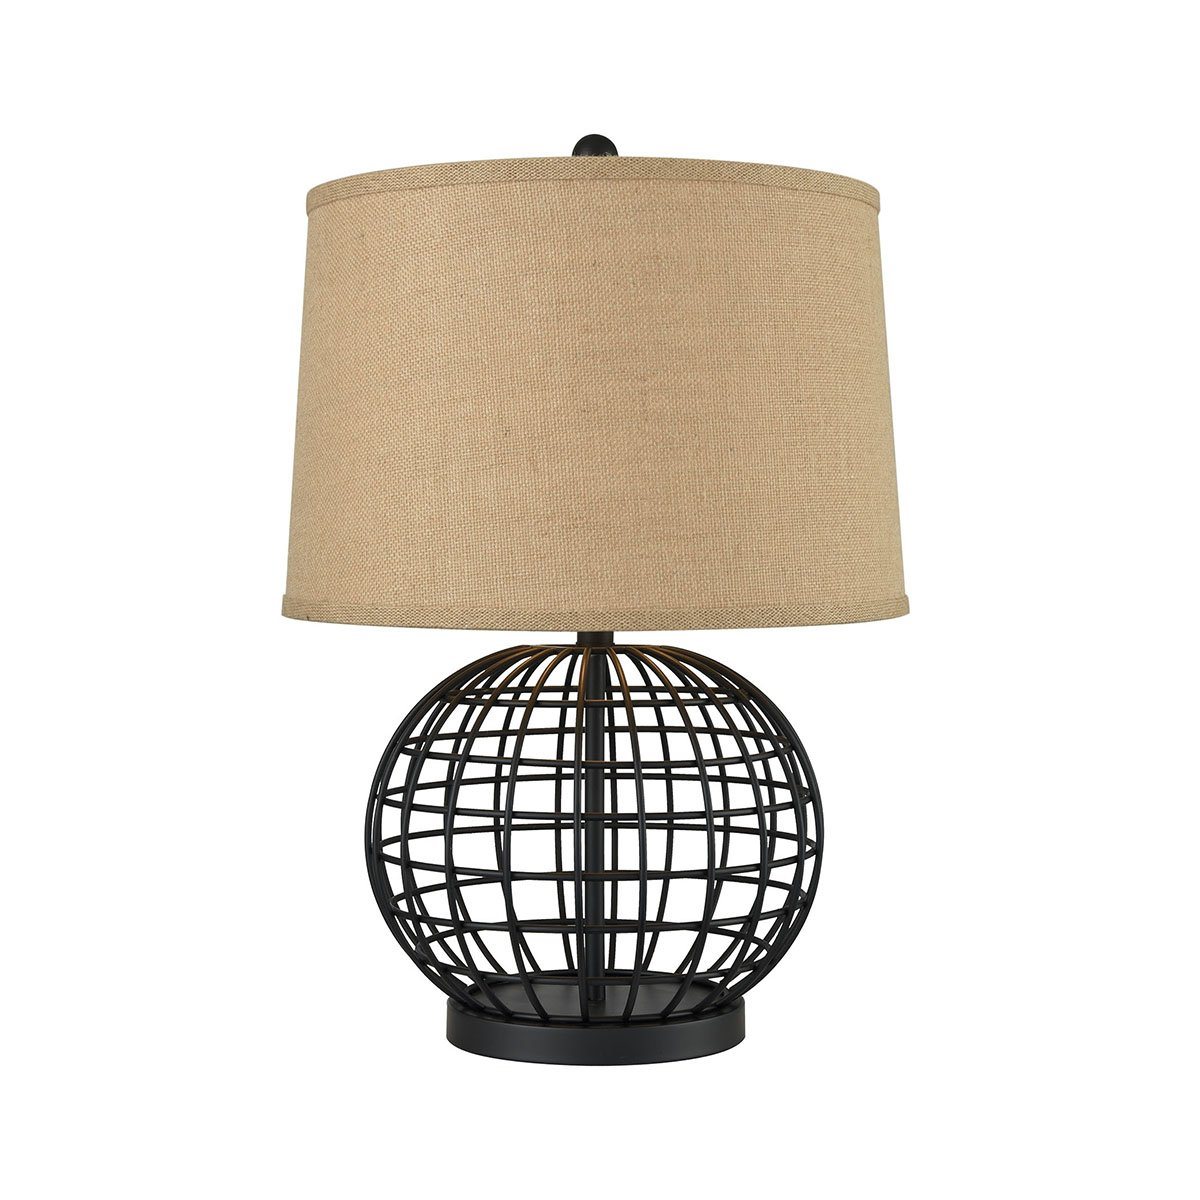 Orbison Table Lamp Lamps Pomeroy 